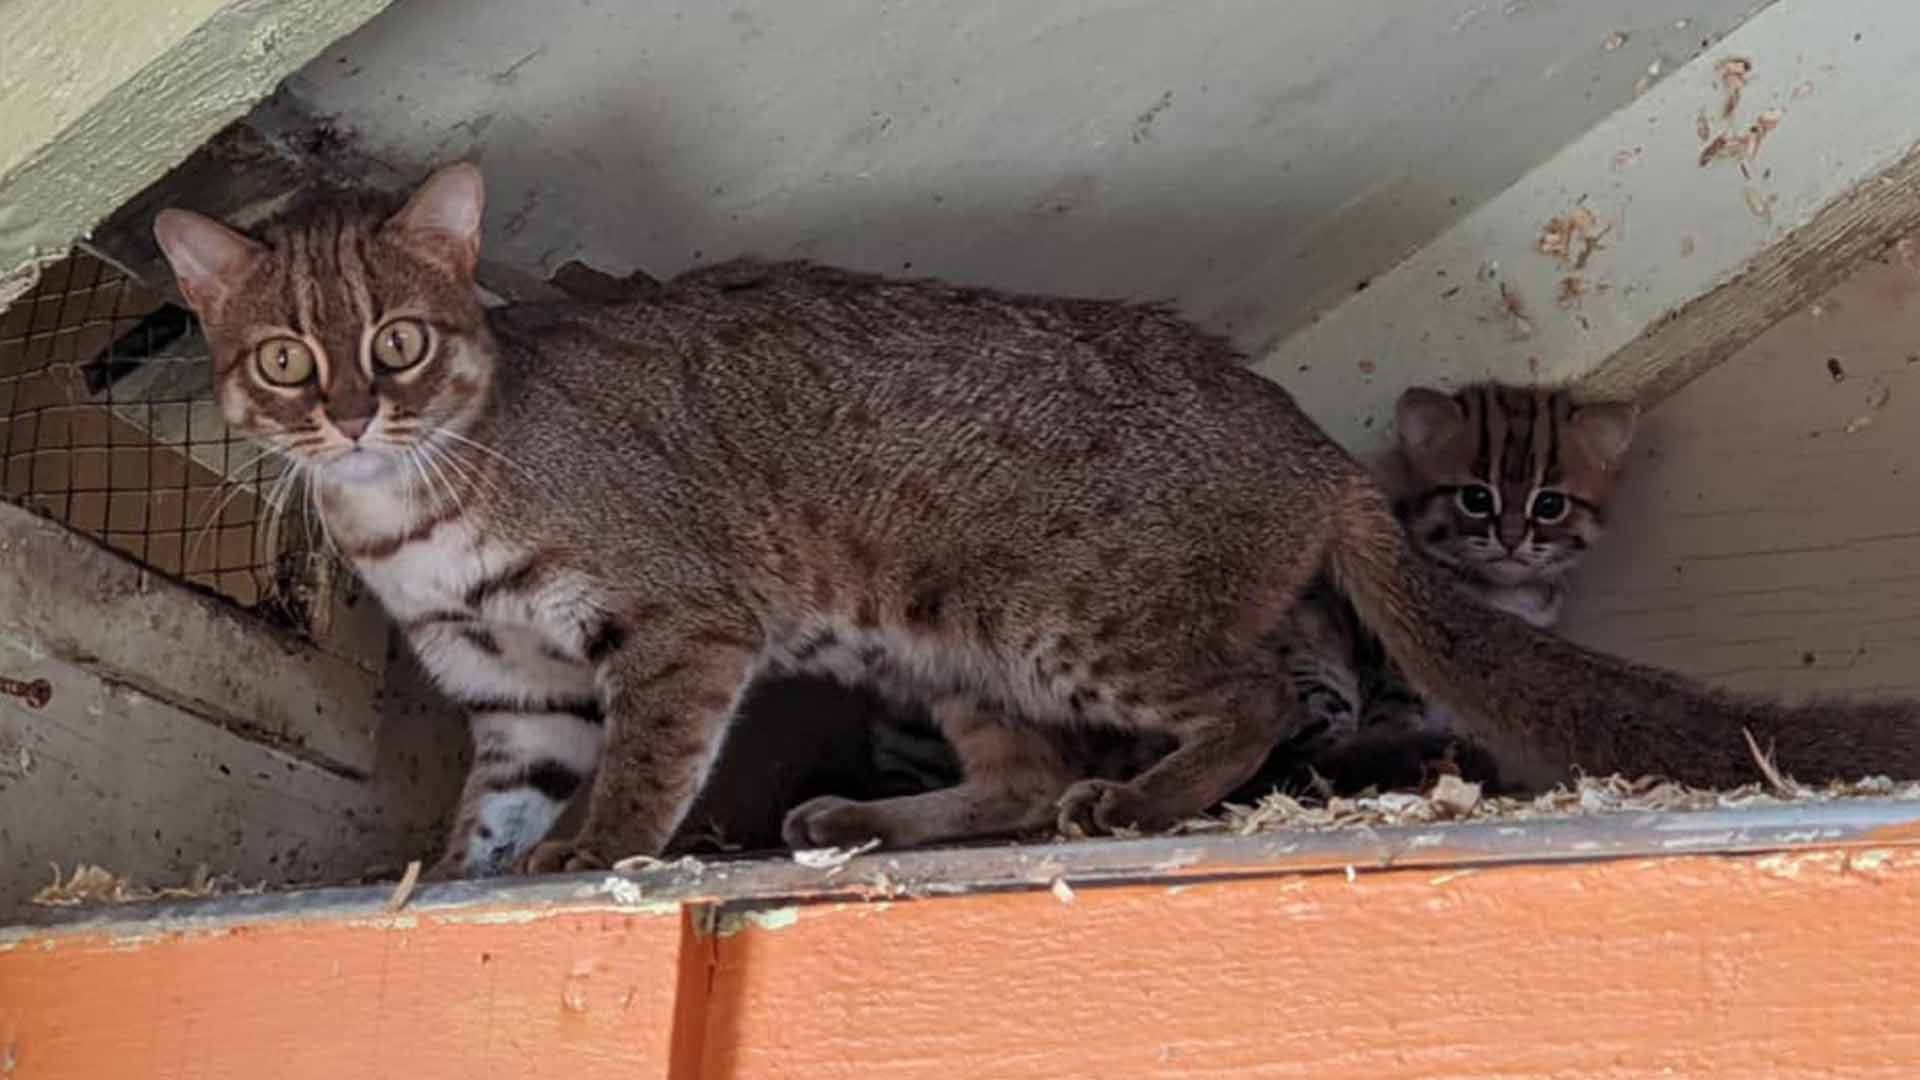 Can You Own A Rusty Spotted Cat As A Pet Pair Of The World S Smallest Wild Cats Born In Uk Sanctuary Totum